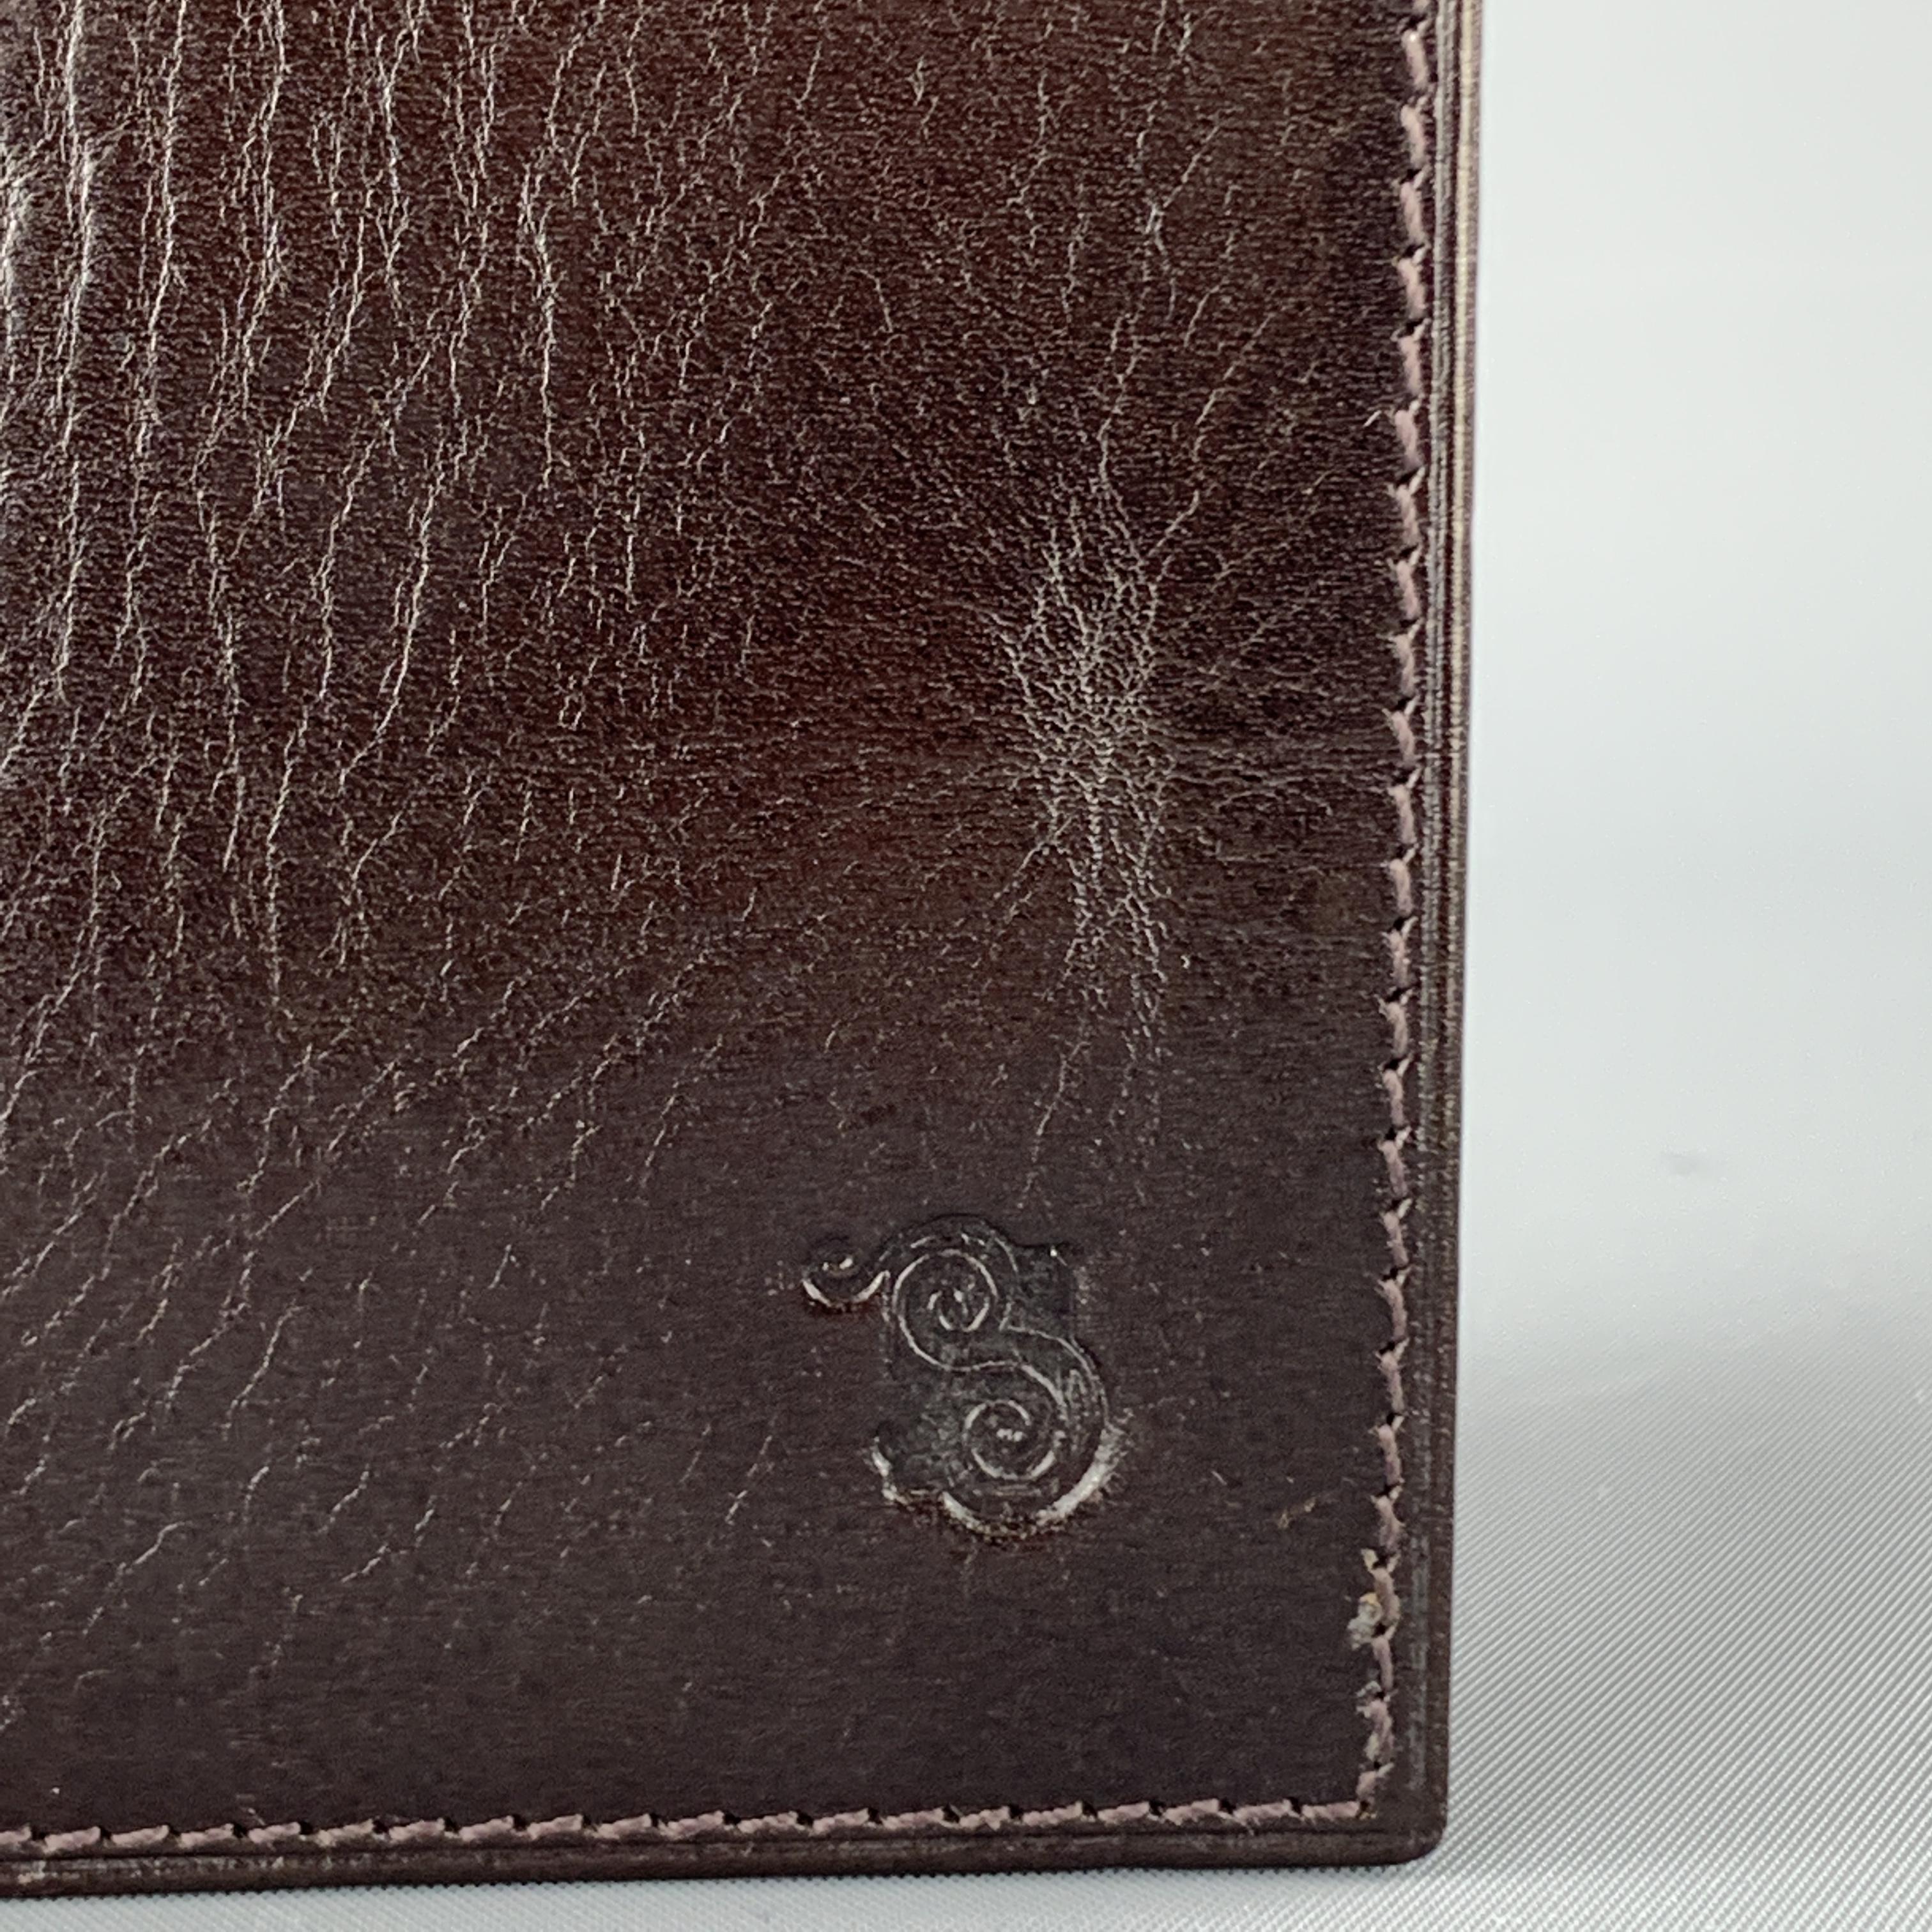 SAGEBROWN passport holder comes in dark wine toned brown leather with a logo stamp and burgundy interior.

Good Pre-Owned Condition.

4 x 6 in.